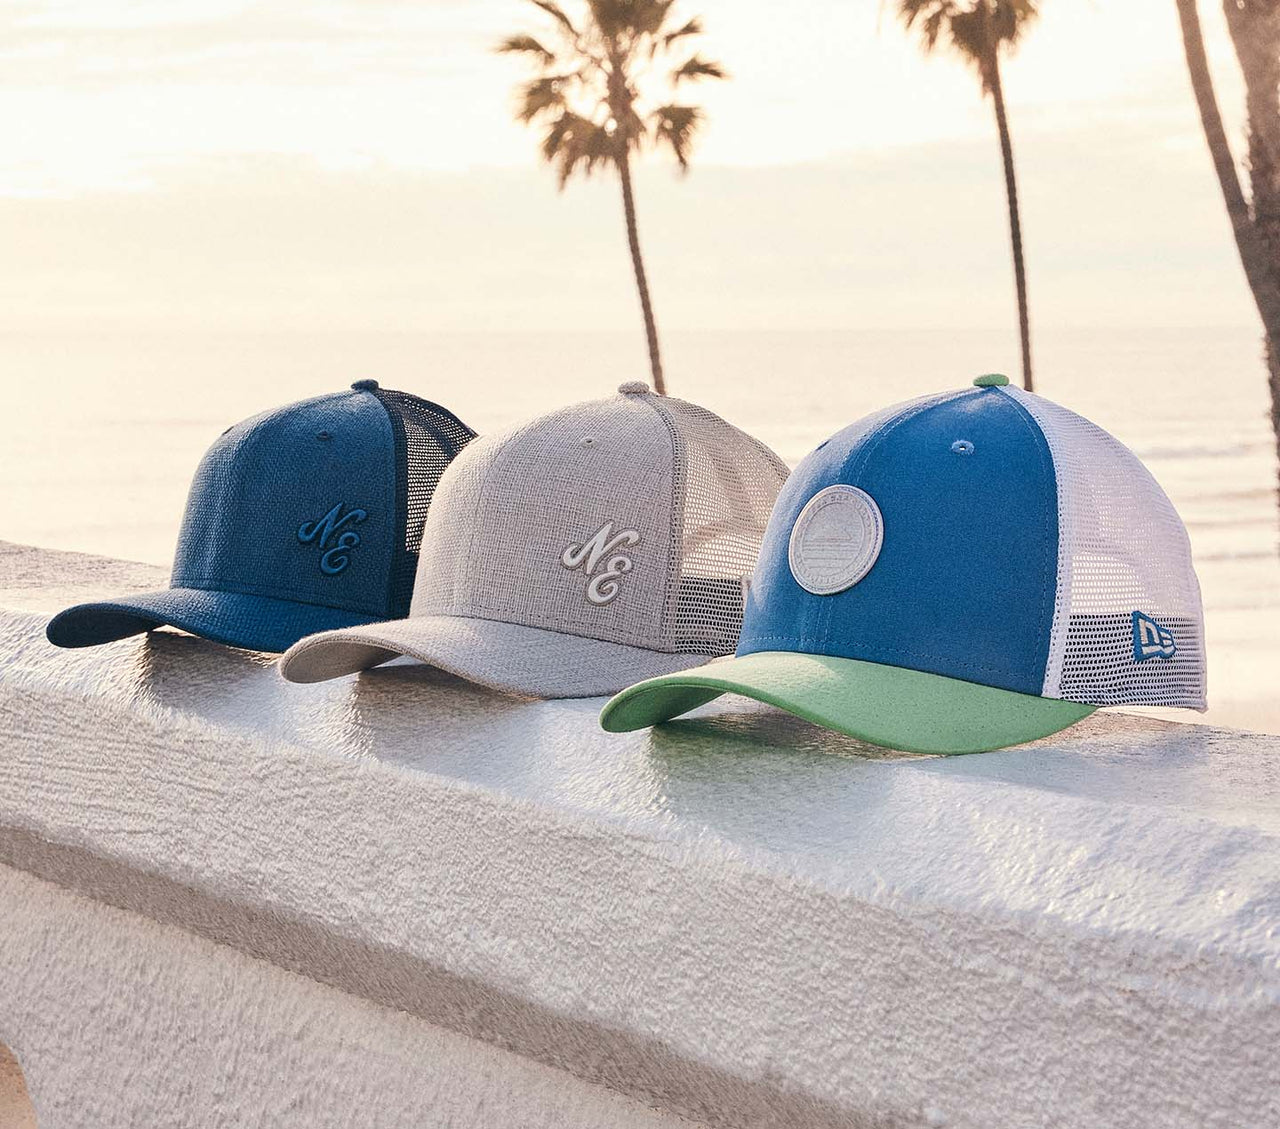 Shop the all-new 9SEVENTY Stretch Snap Cap